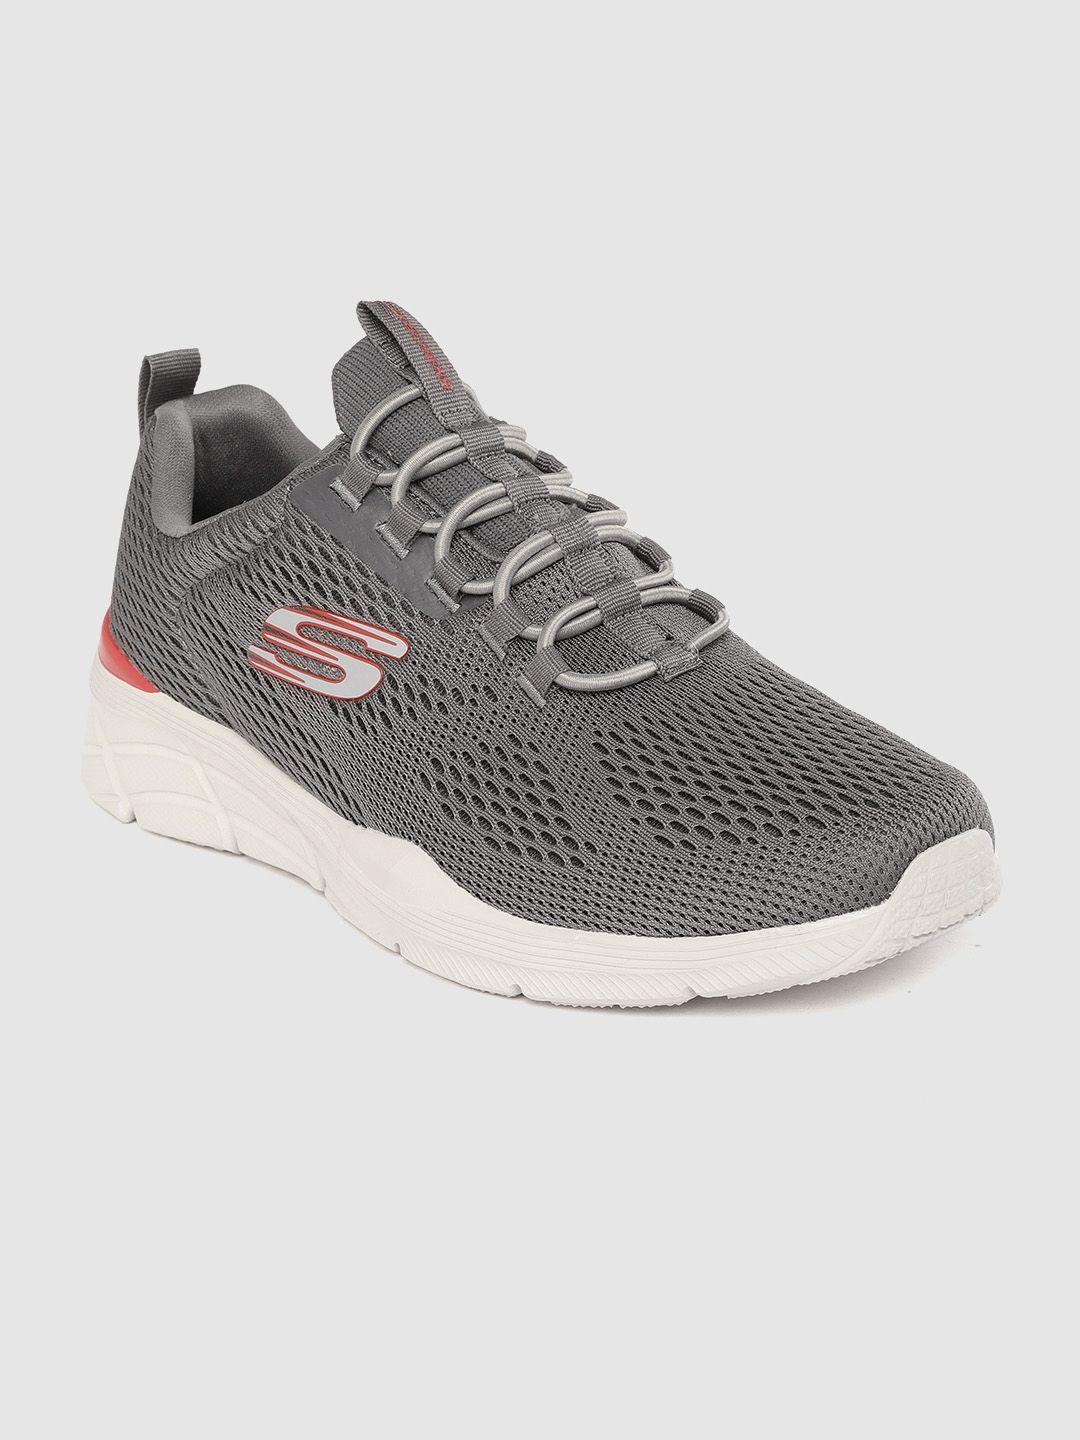 skechers men grey woven design equalizer 4.0 - wraithern sneakers